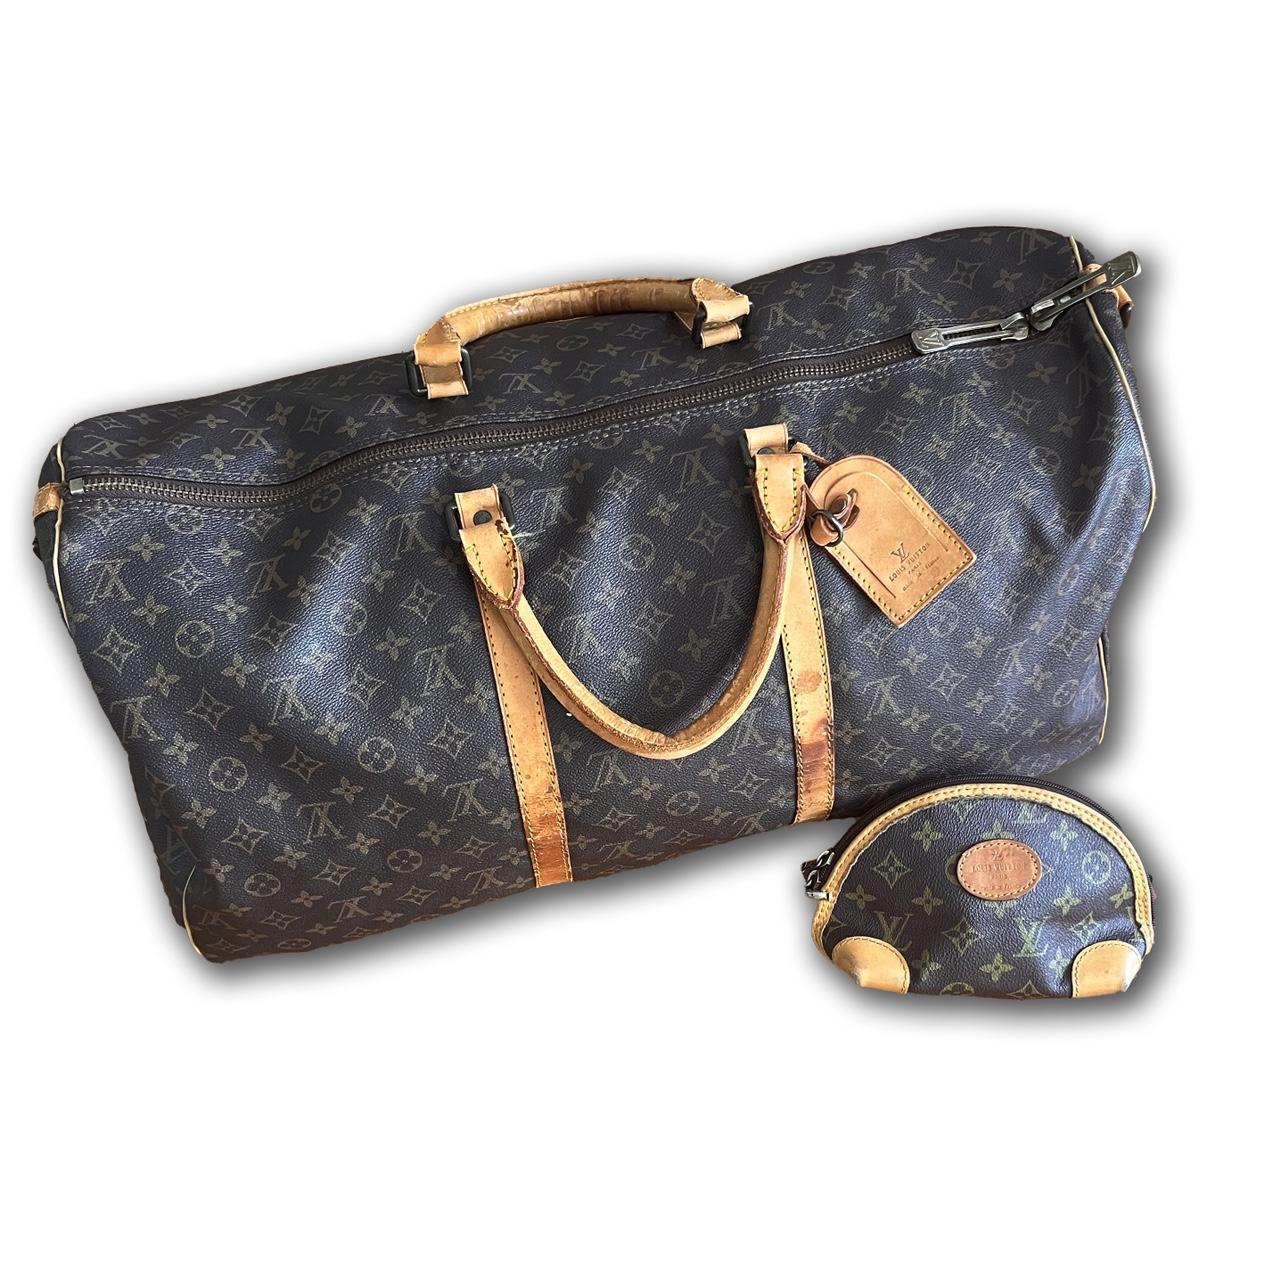 AUTHENTICATED LOUIS VUITTON MONOGRAM KEEPALL 55